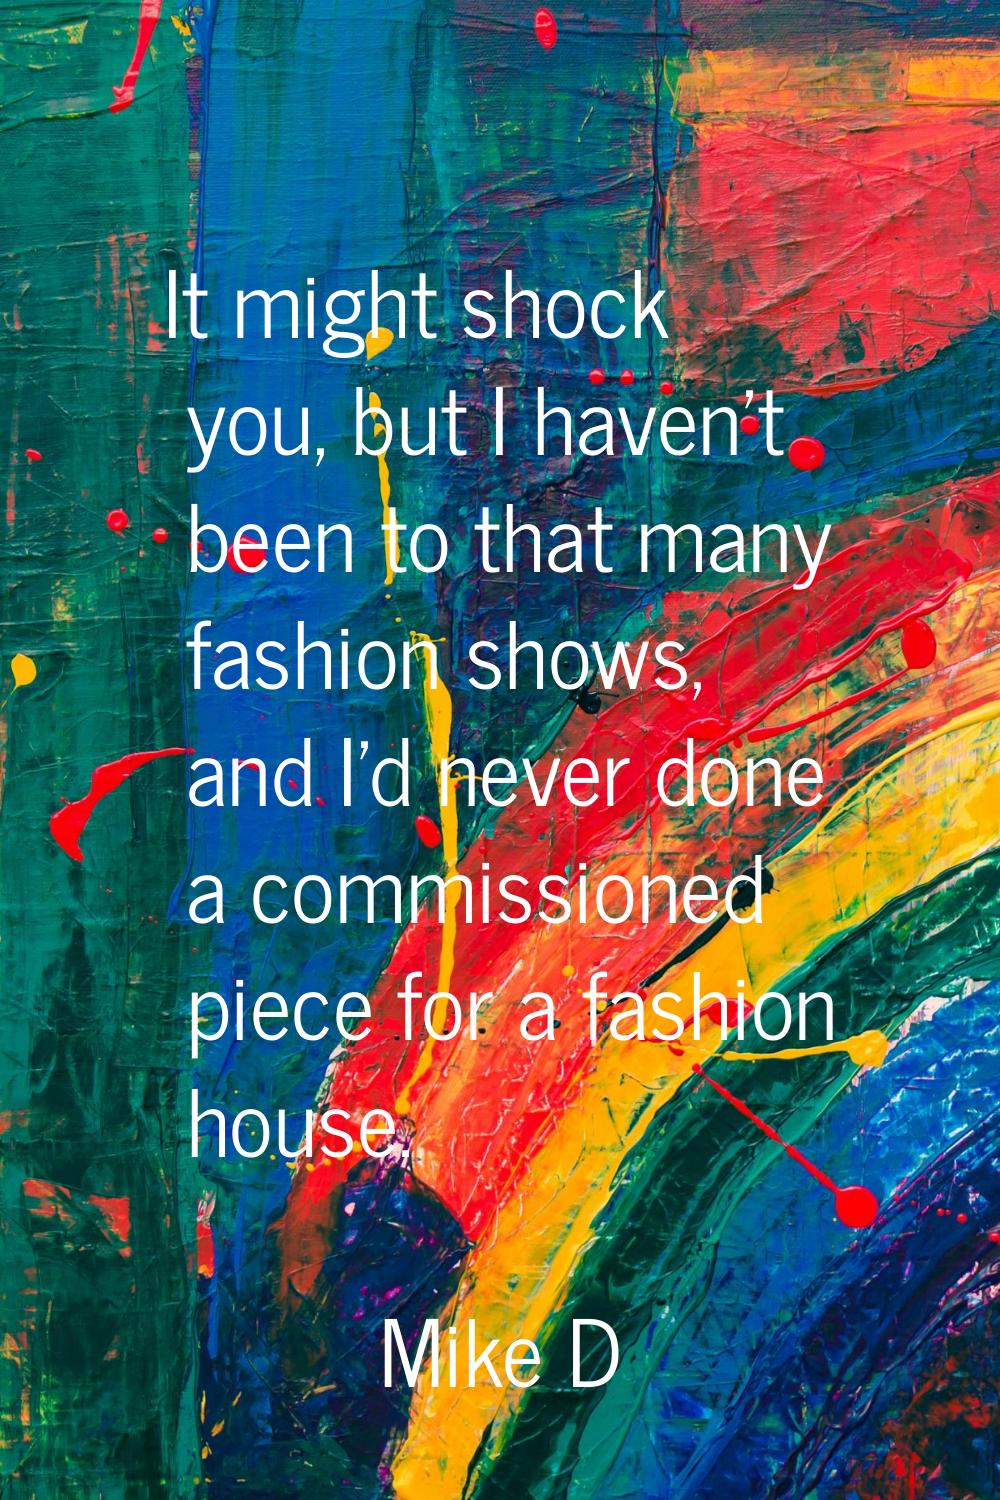 It might shock you, but I haven't been to that many fashion shows, and I'd never done a commissione